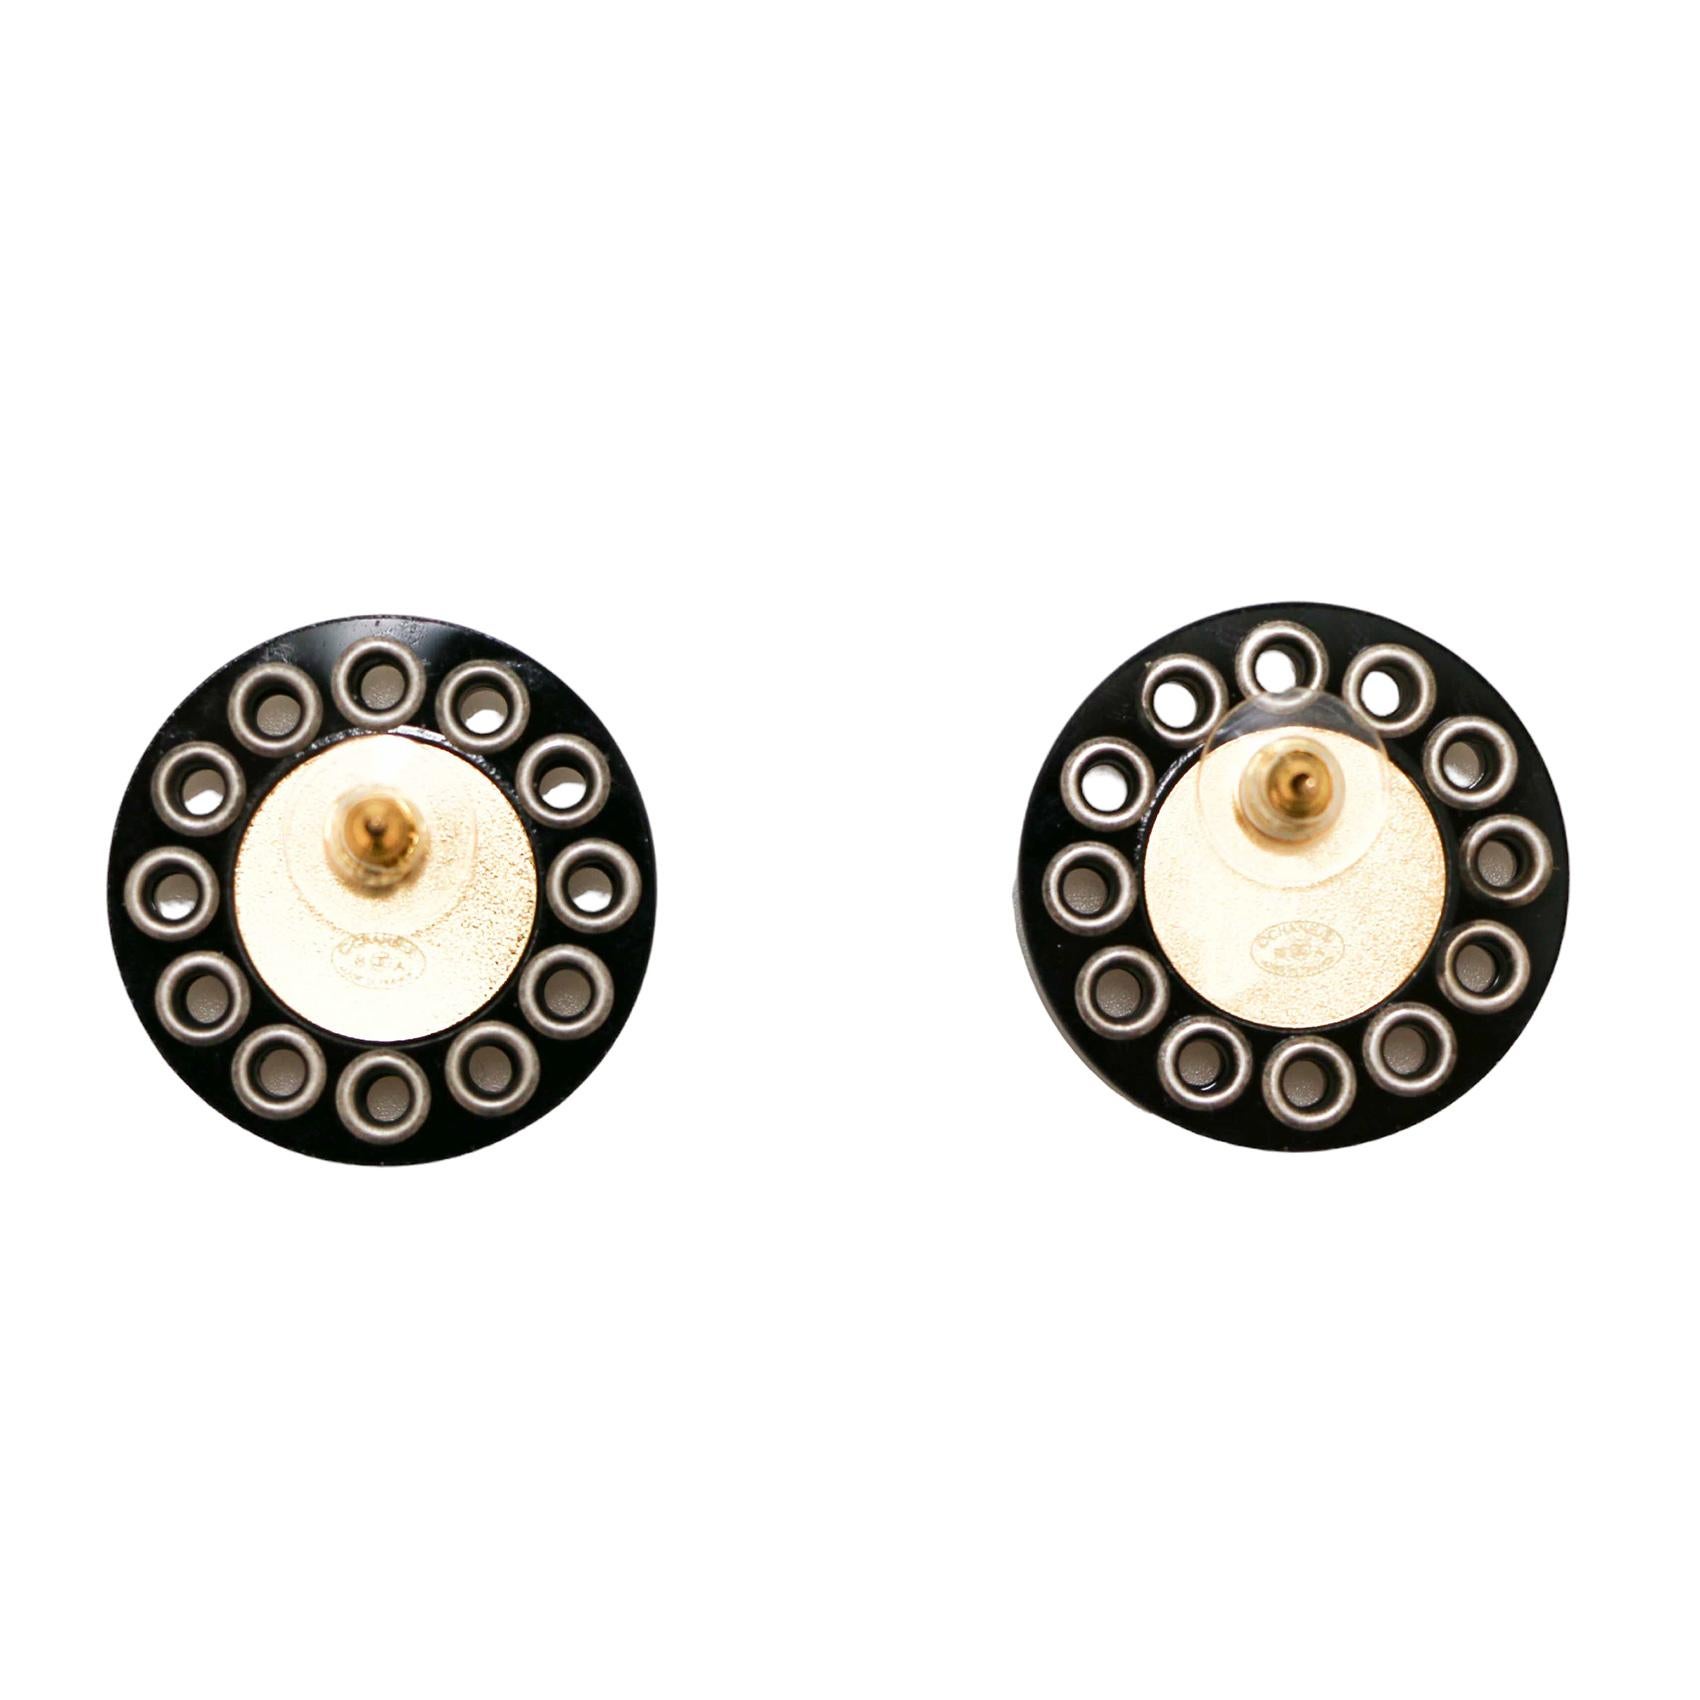 Beautiful Chanel Studs from Autumn 1995

Condition : very good
Made in France
Materials : metal and plastic
Colors : black, silver, gold
Dimensions : 3x3cm
Hardware : silver and gold
Stamp : yes
Year : Autumn 1995
Details : letters CC and small